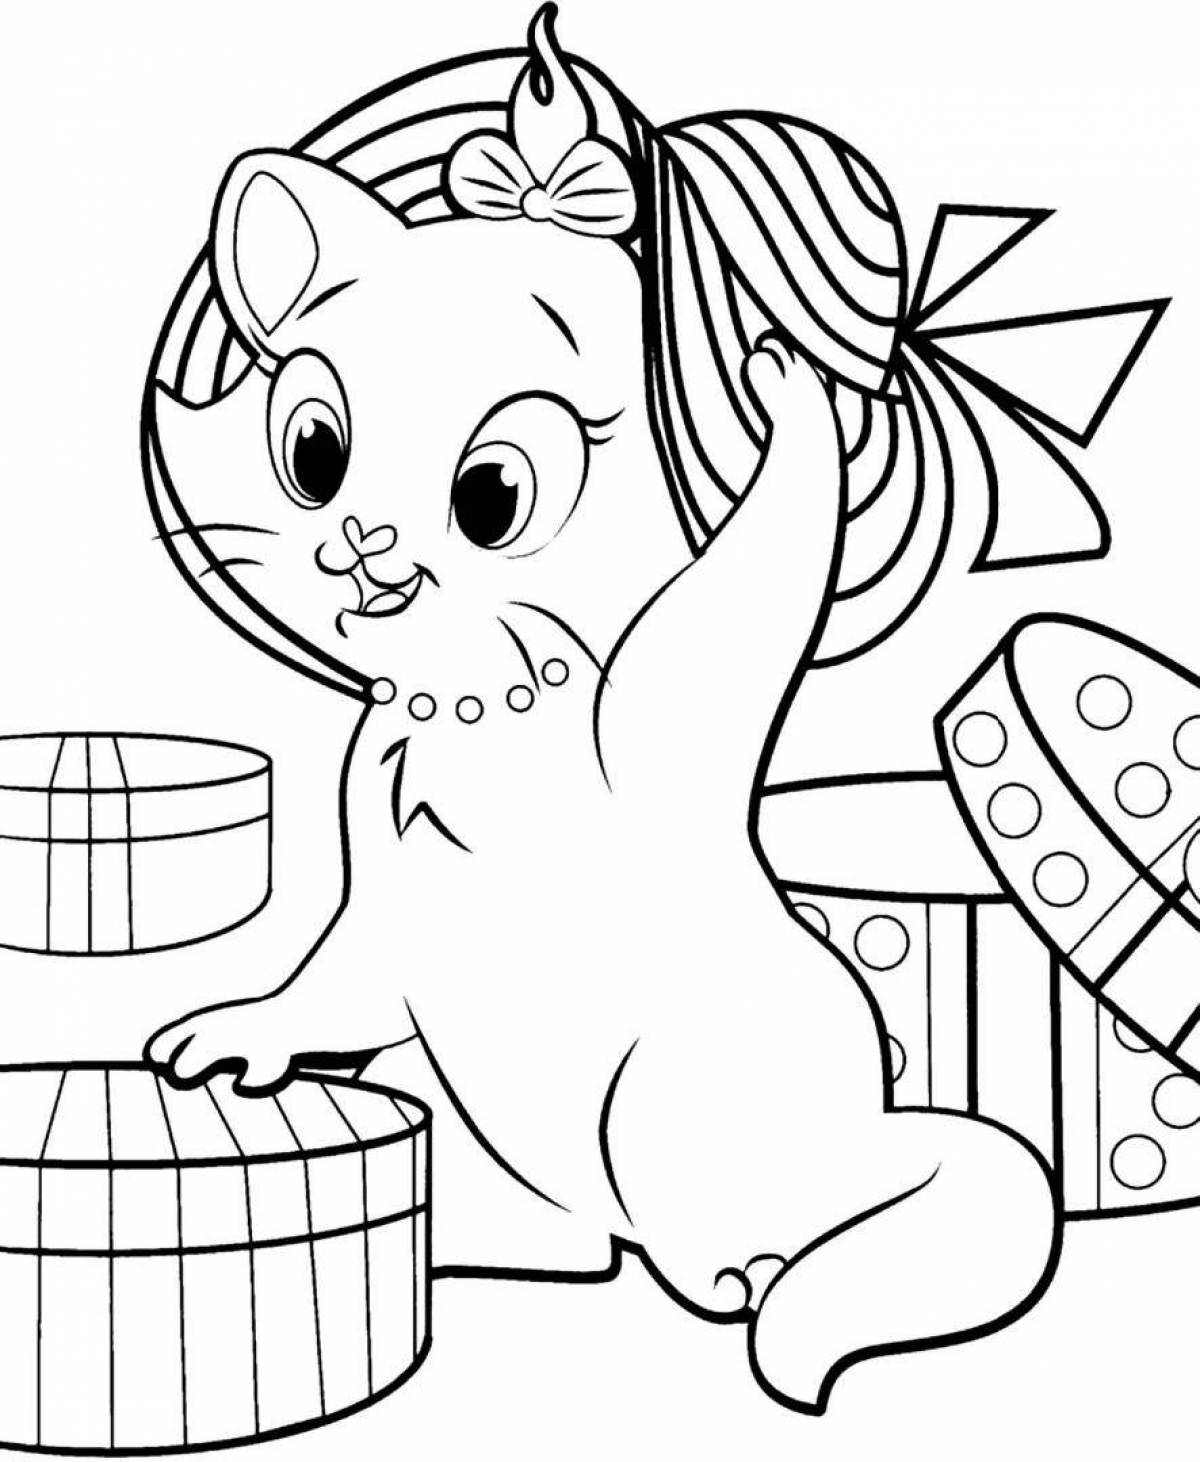 Coloring cats for girls